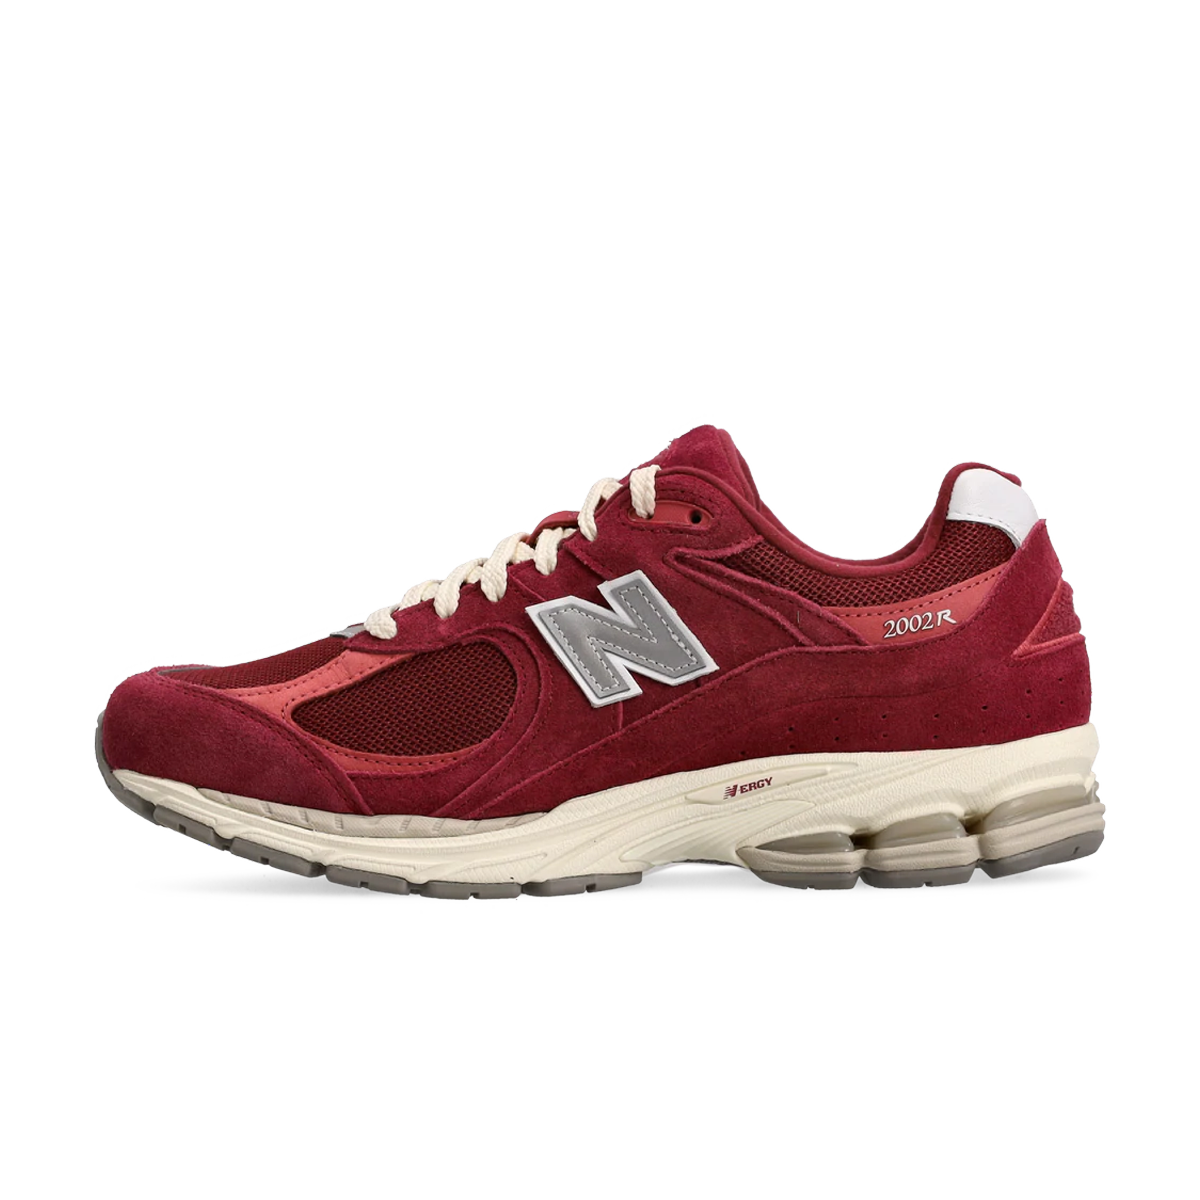 New Balance 2002R 'Bordeaux' - Higher Learning pack